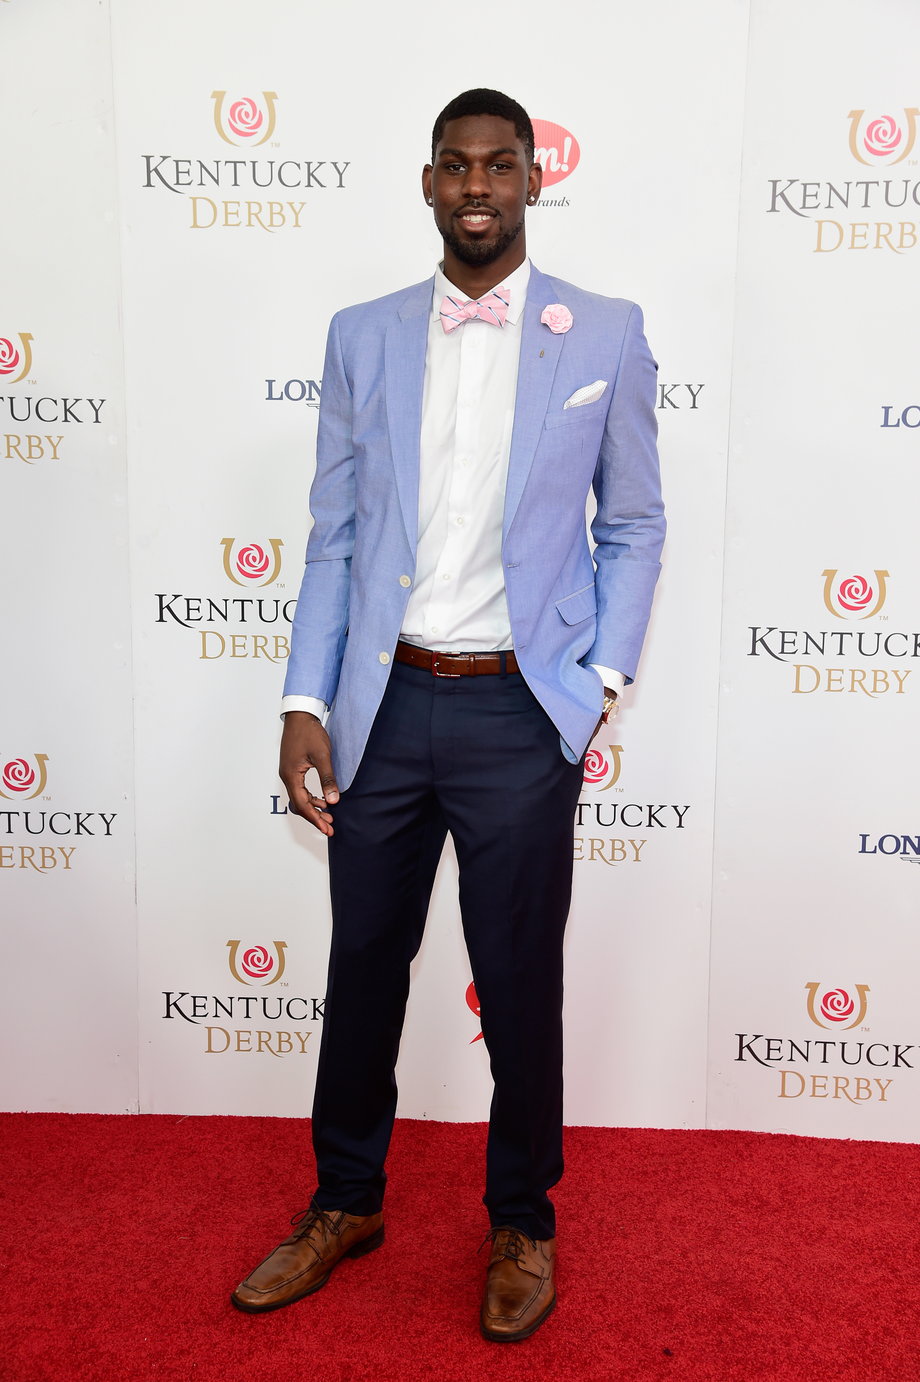 BEST: Former University of Kentucky basketball player Alex Poythress knows how to wear a bowtie and a suit.